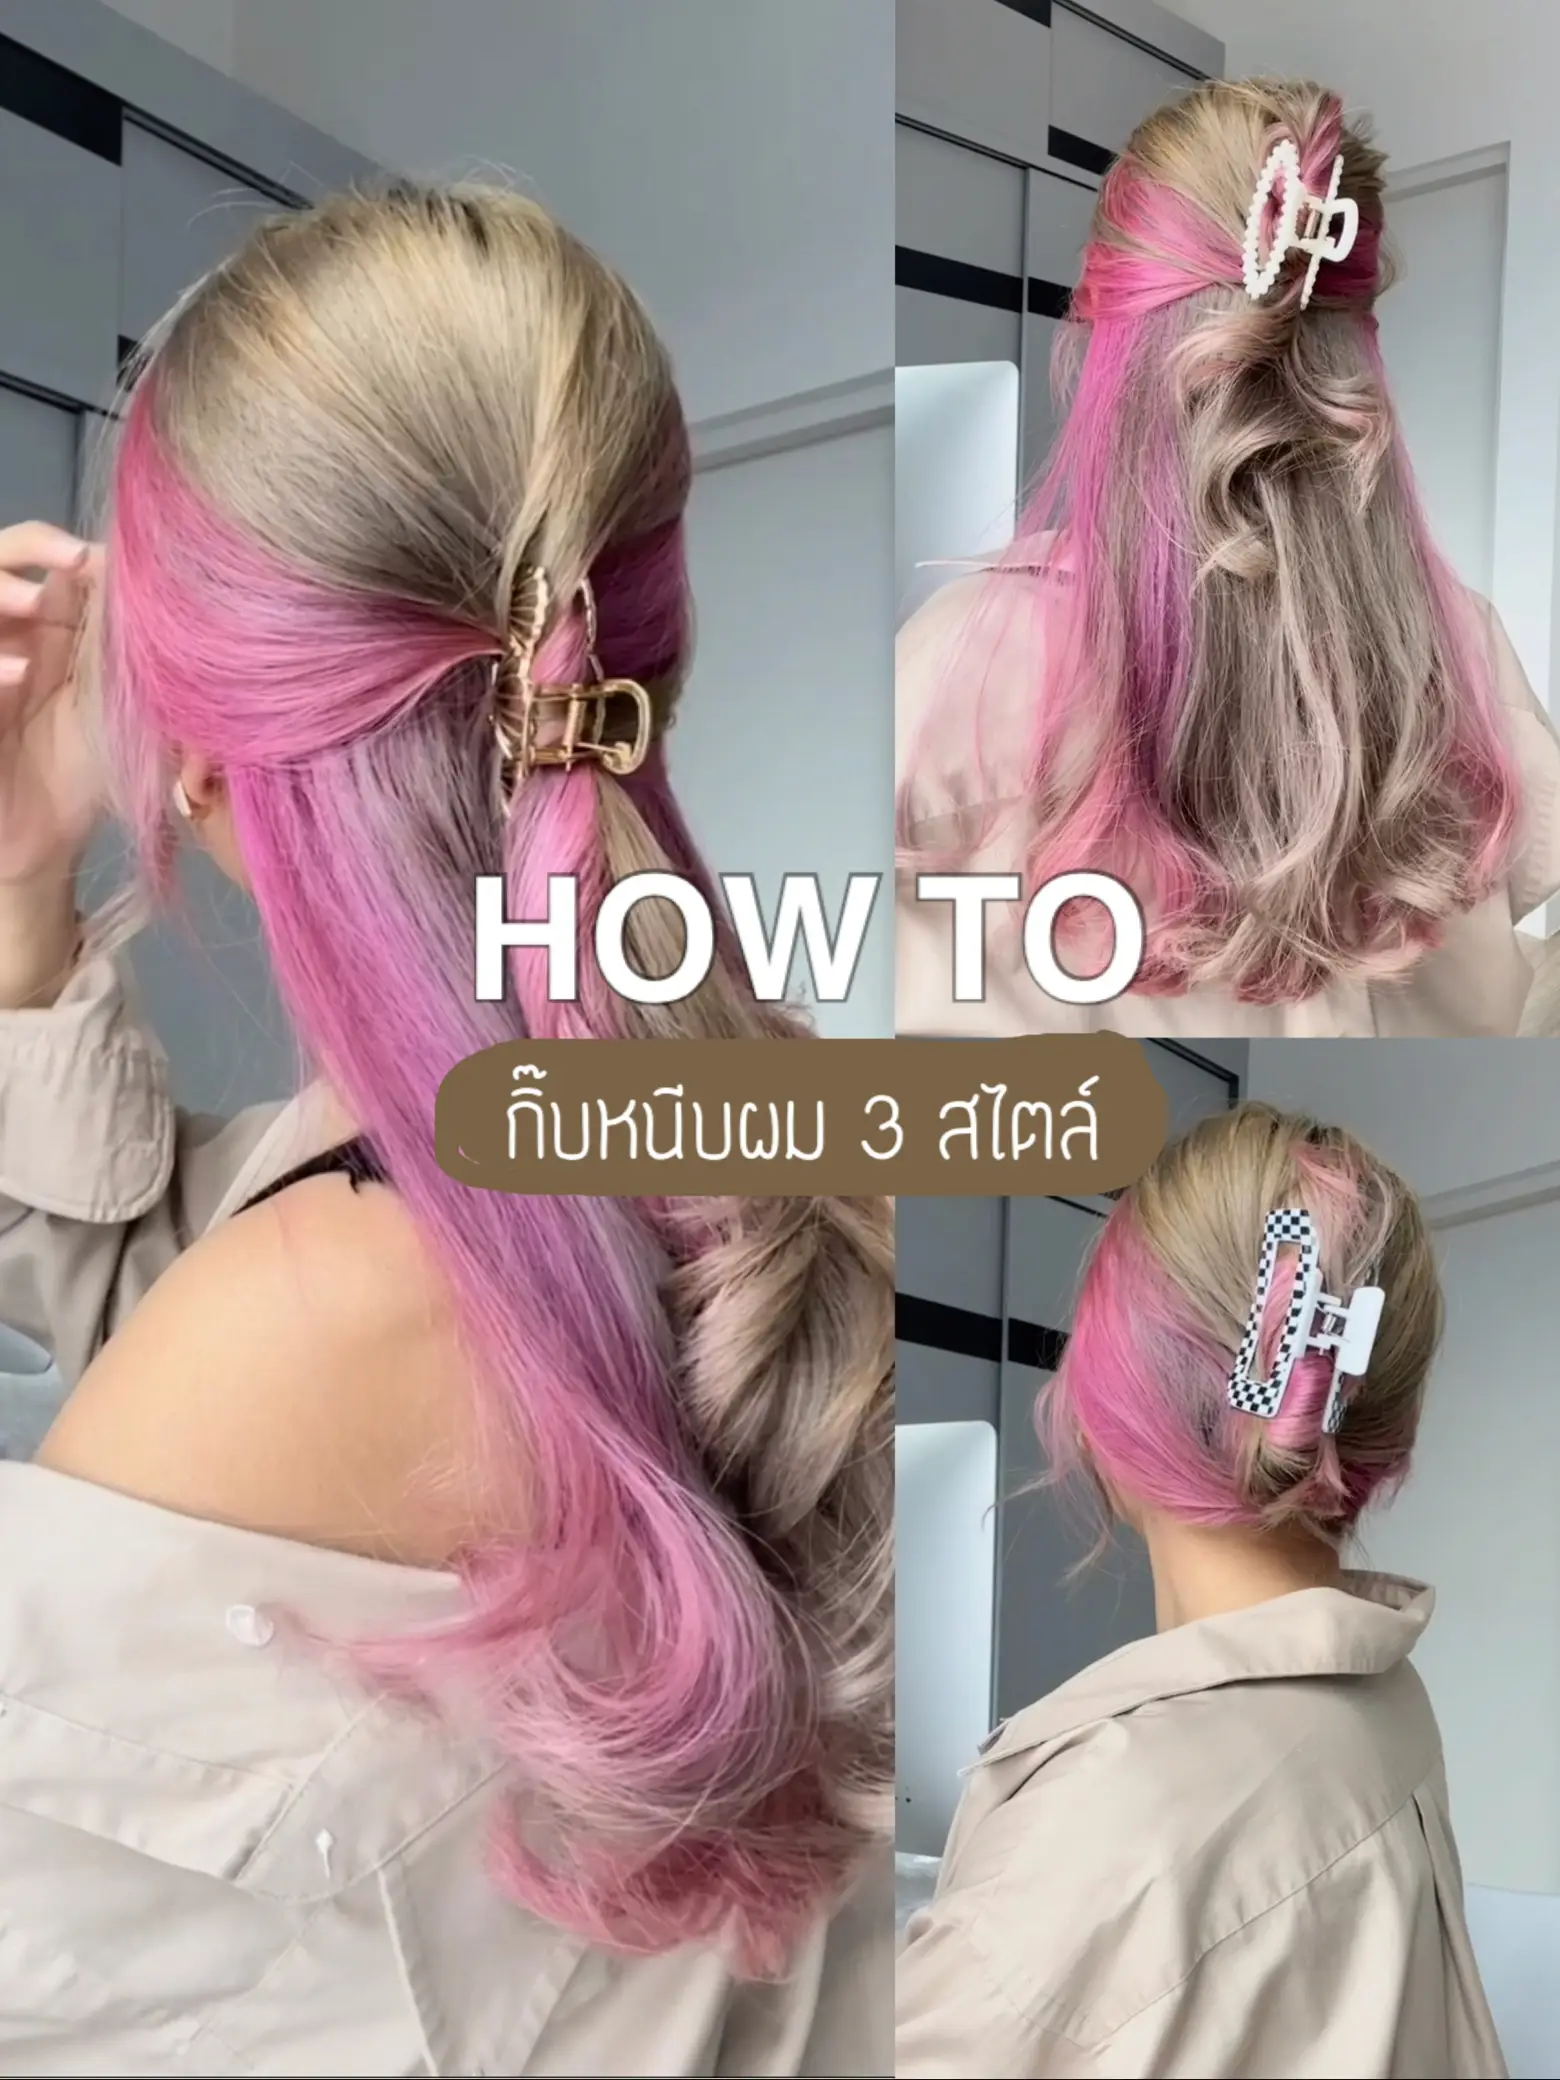 Top 2 best hair trick for fluffy hair ✨✨ #hairstyle #hairtok